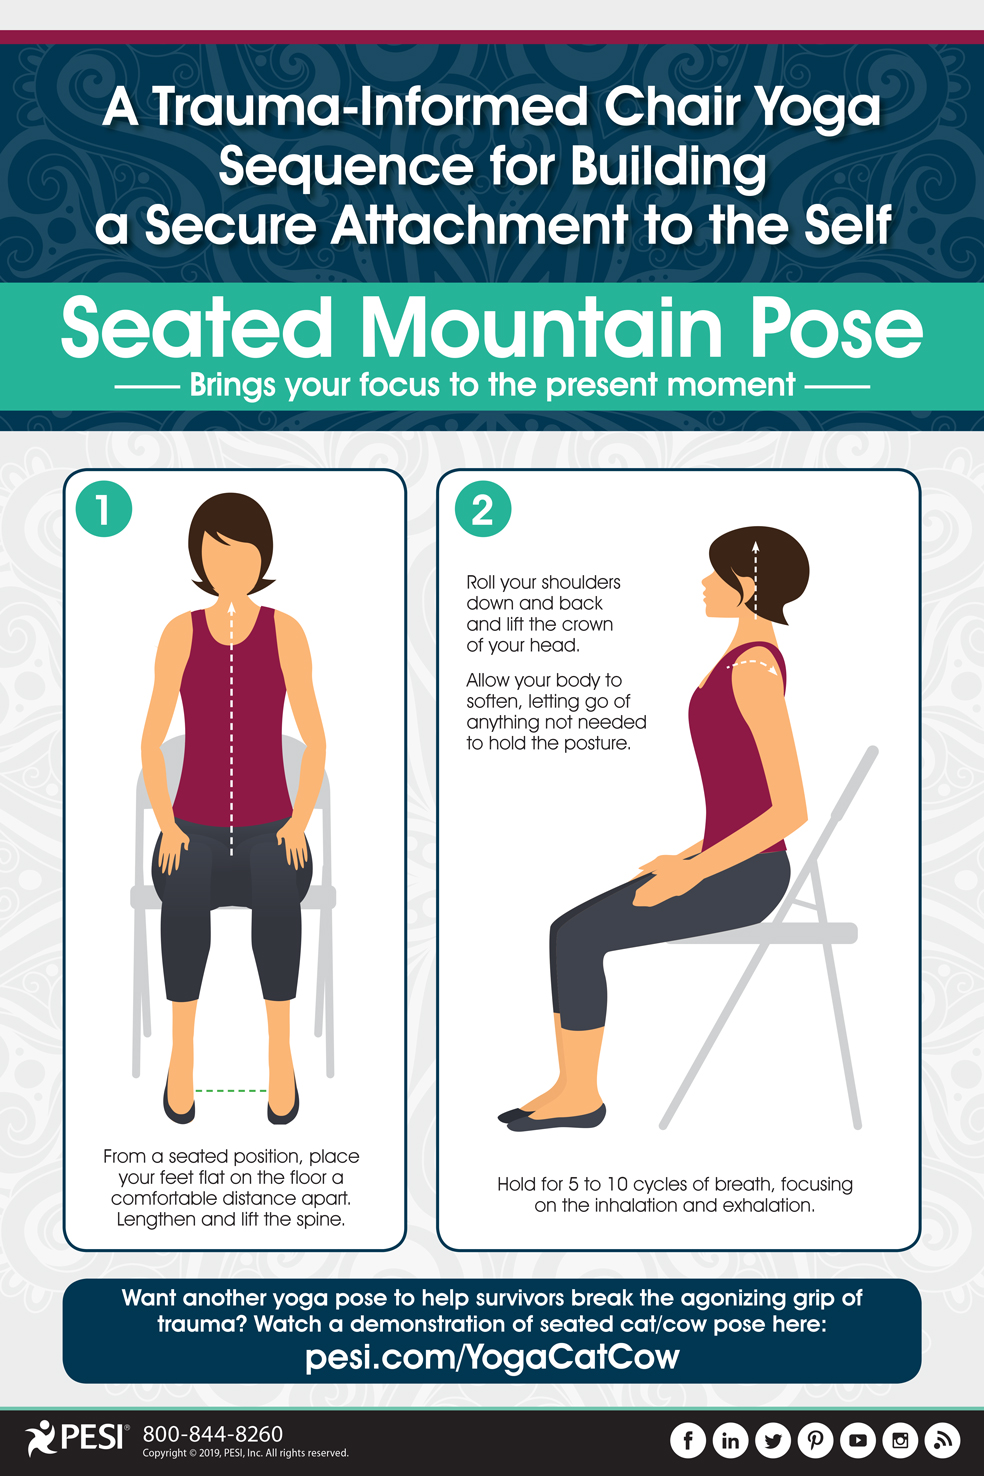 5 Simple Chair Yoga Poses For Seniors - Dherbs.com - Articles